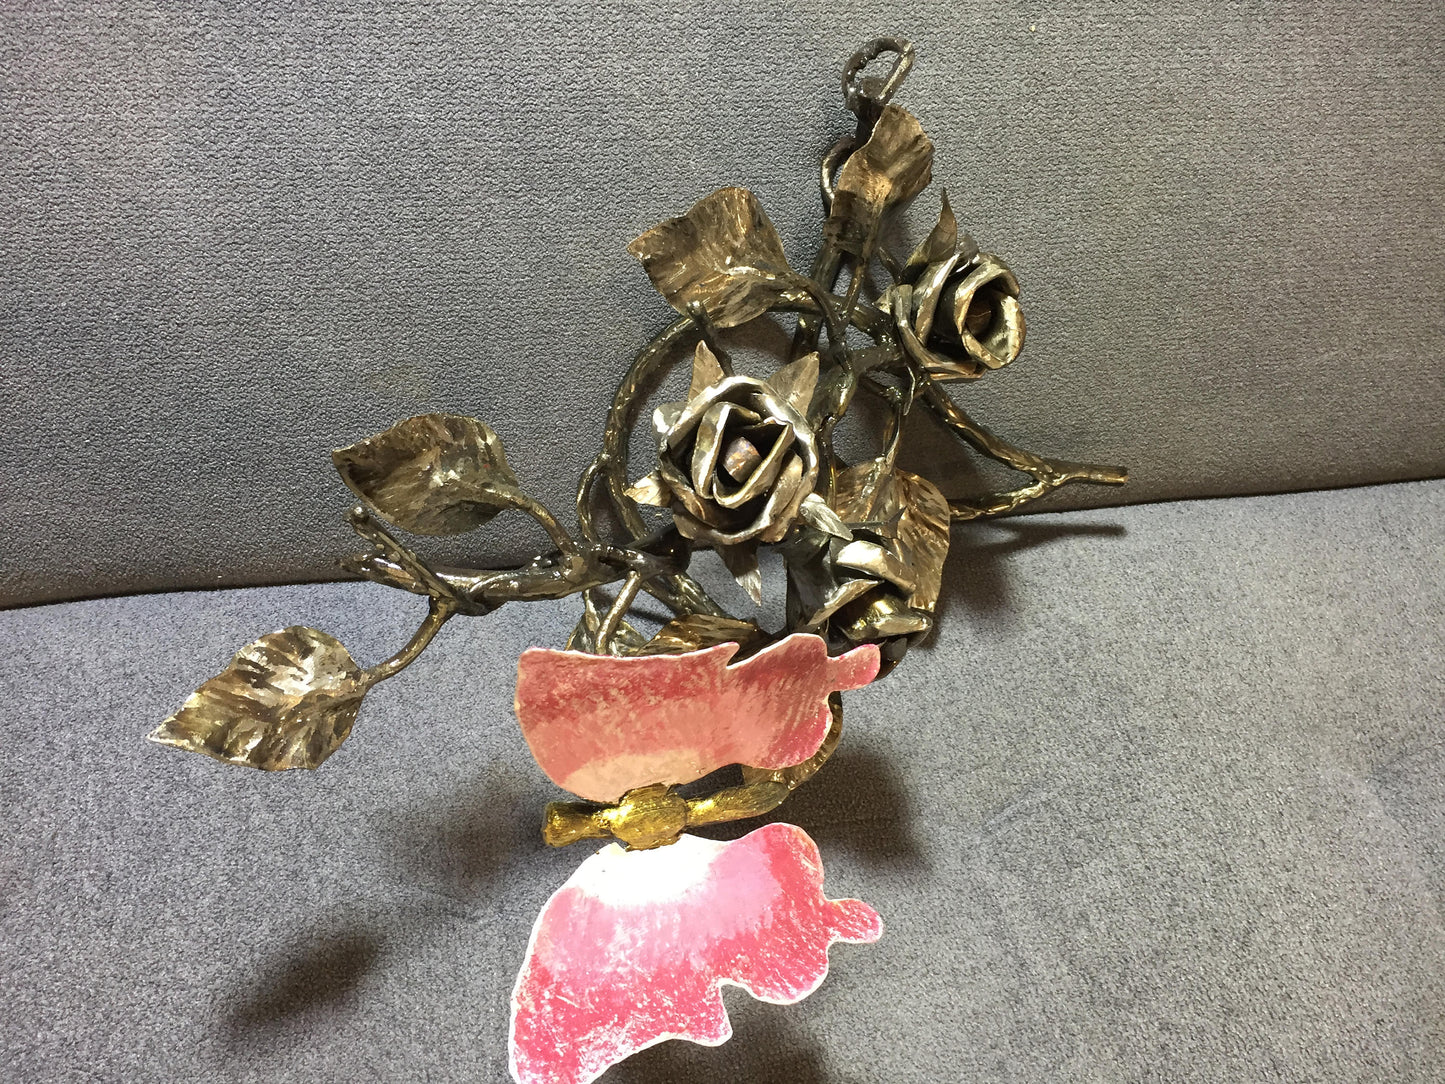 Iron butterfly on iron roses, metal bouquet, iron gift, iron anniversary gift, metal sculpture, steampunk furniture, barn door handle, lily